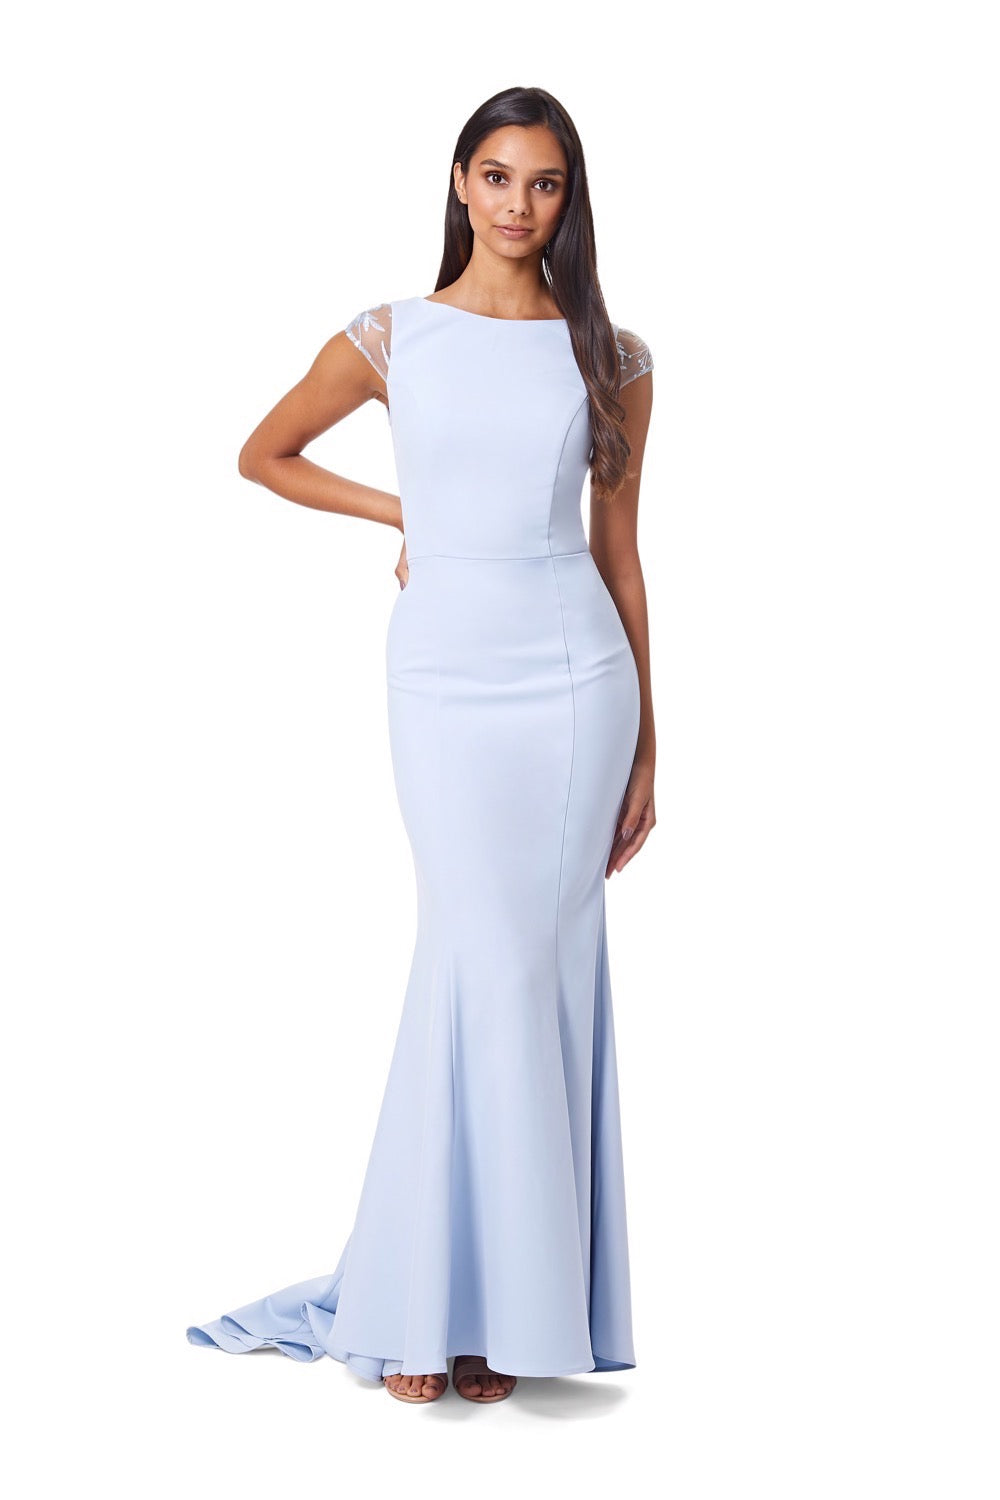 Masa Fishtail Maxi Dress with Lace Cap Sleeves and Embroidered Button Back, UK 6 / US 2 / EU 34 / Powder Blue